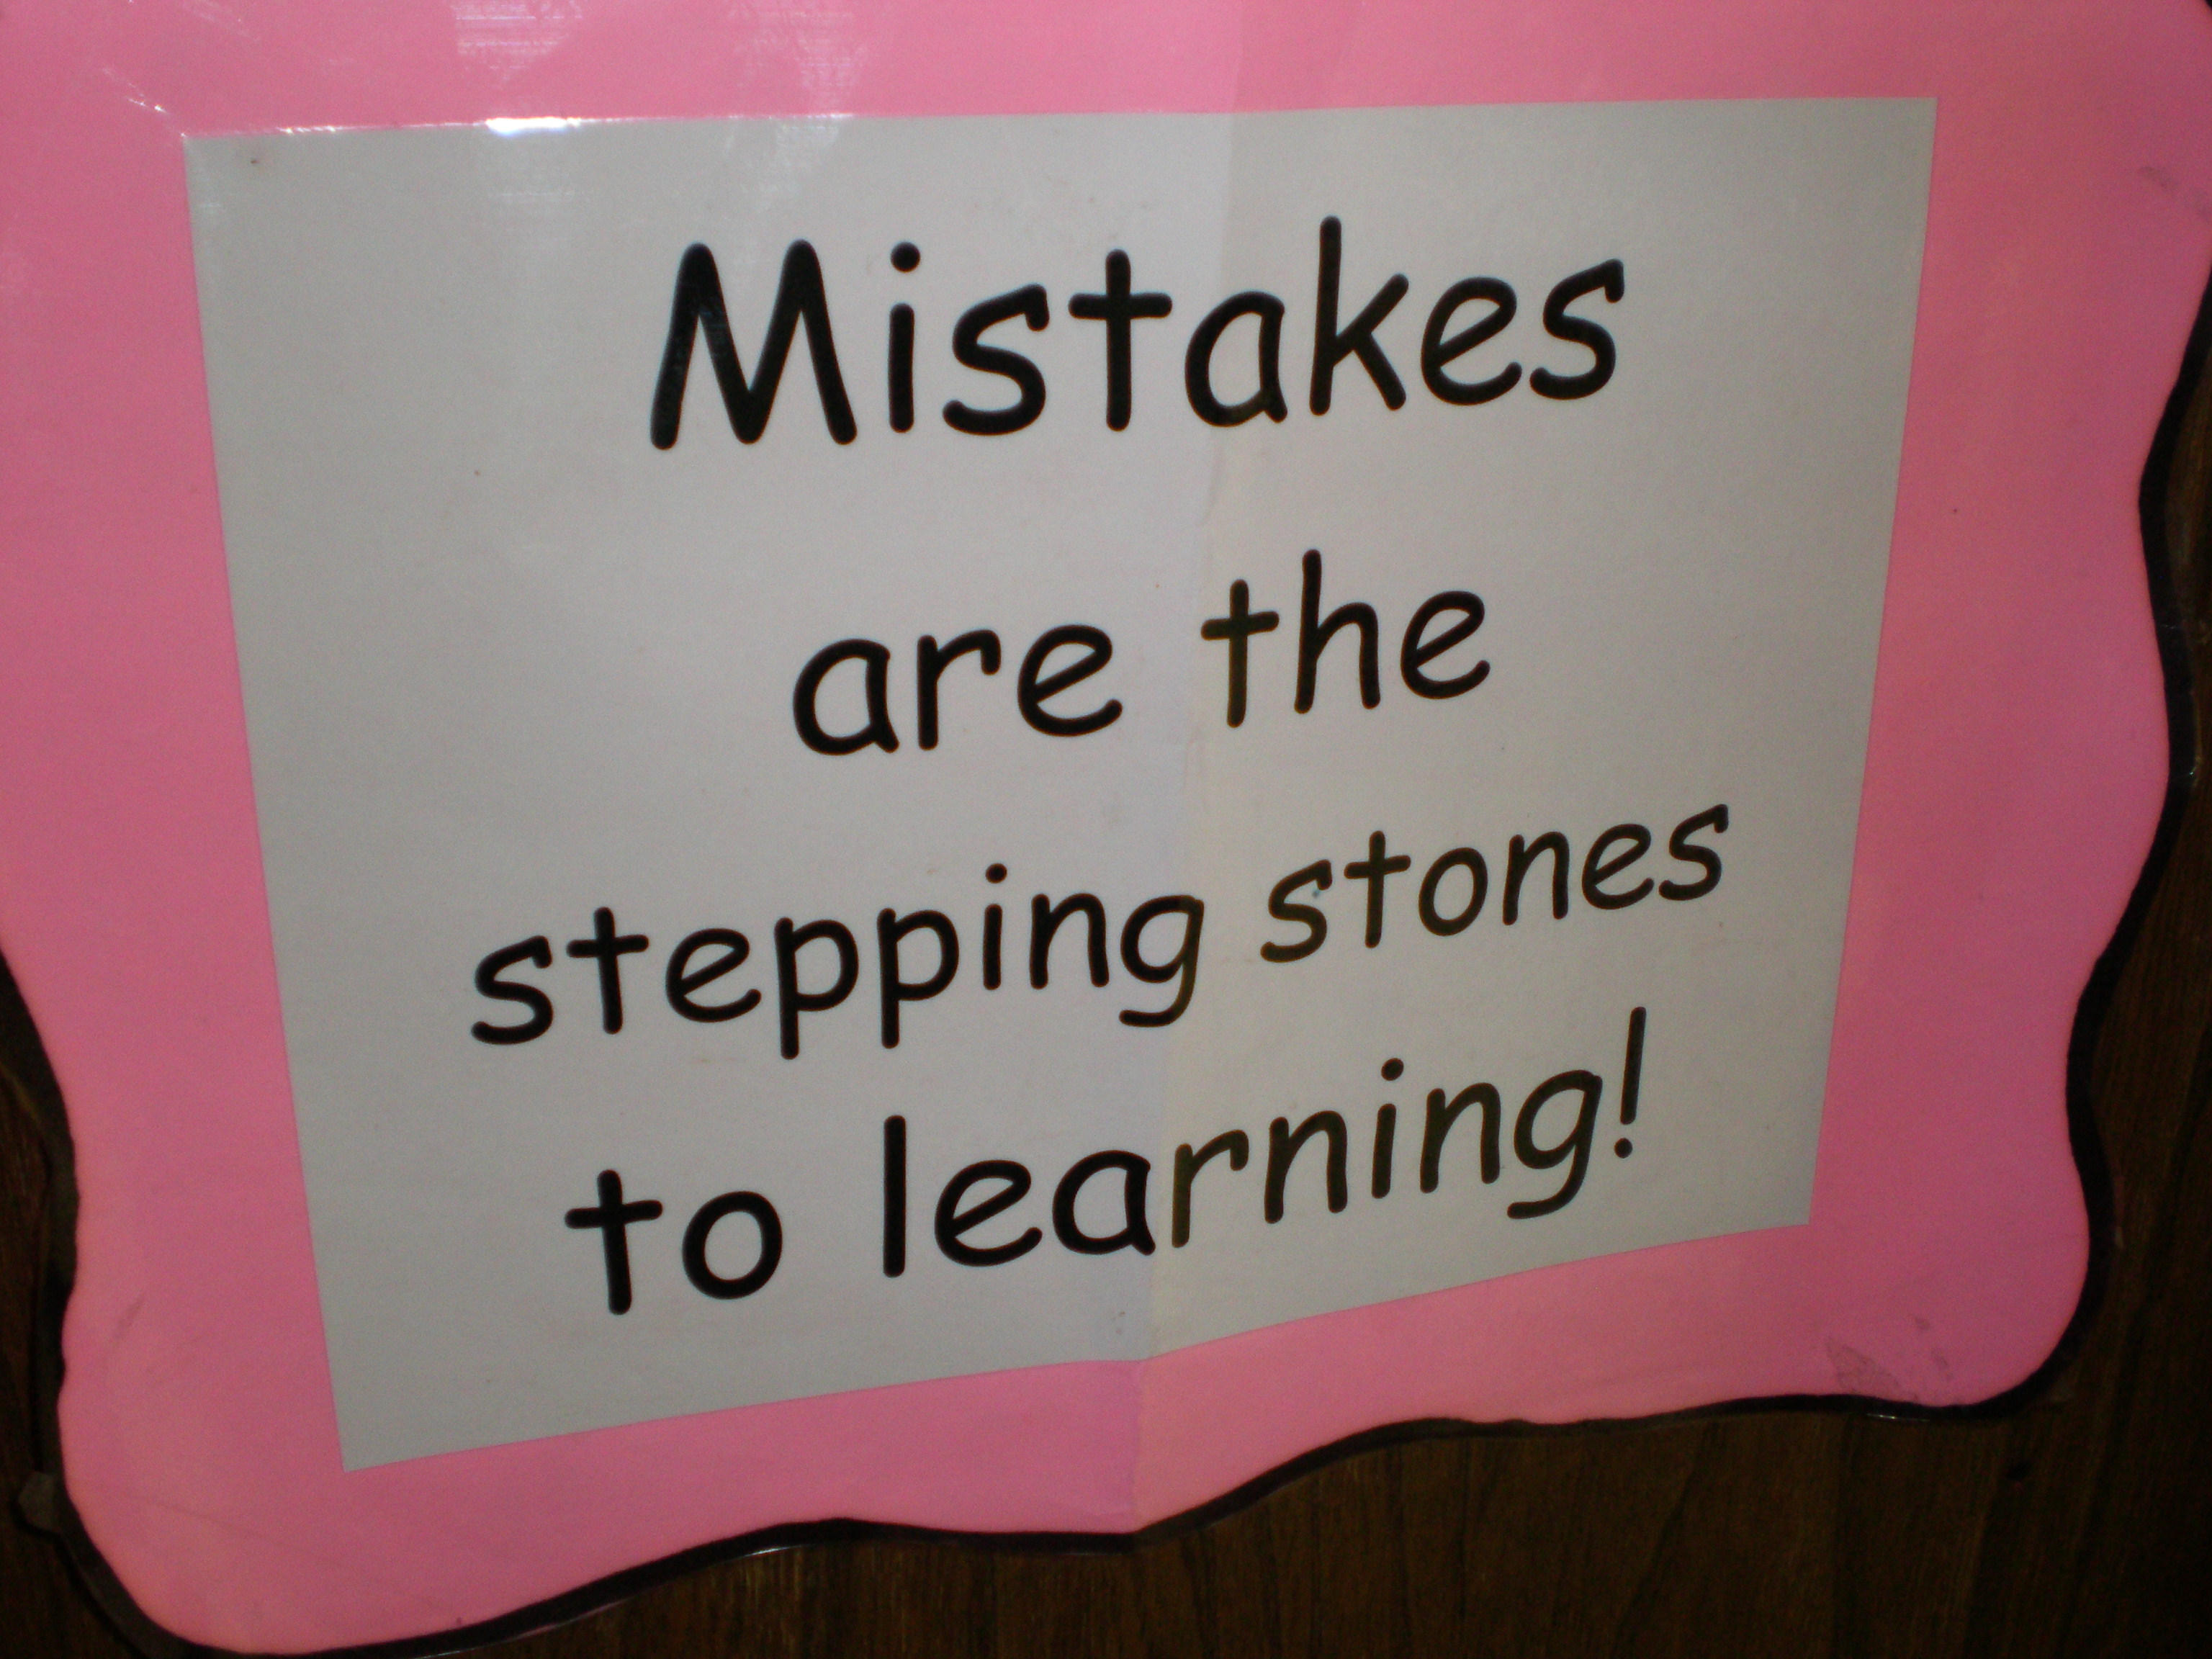 Mistakes. Learn from your mistakes. To admit mistake. Make no mistake. Where is the mistake